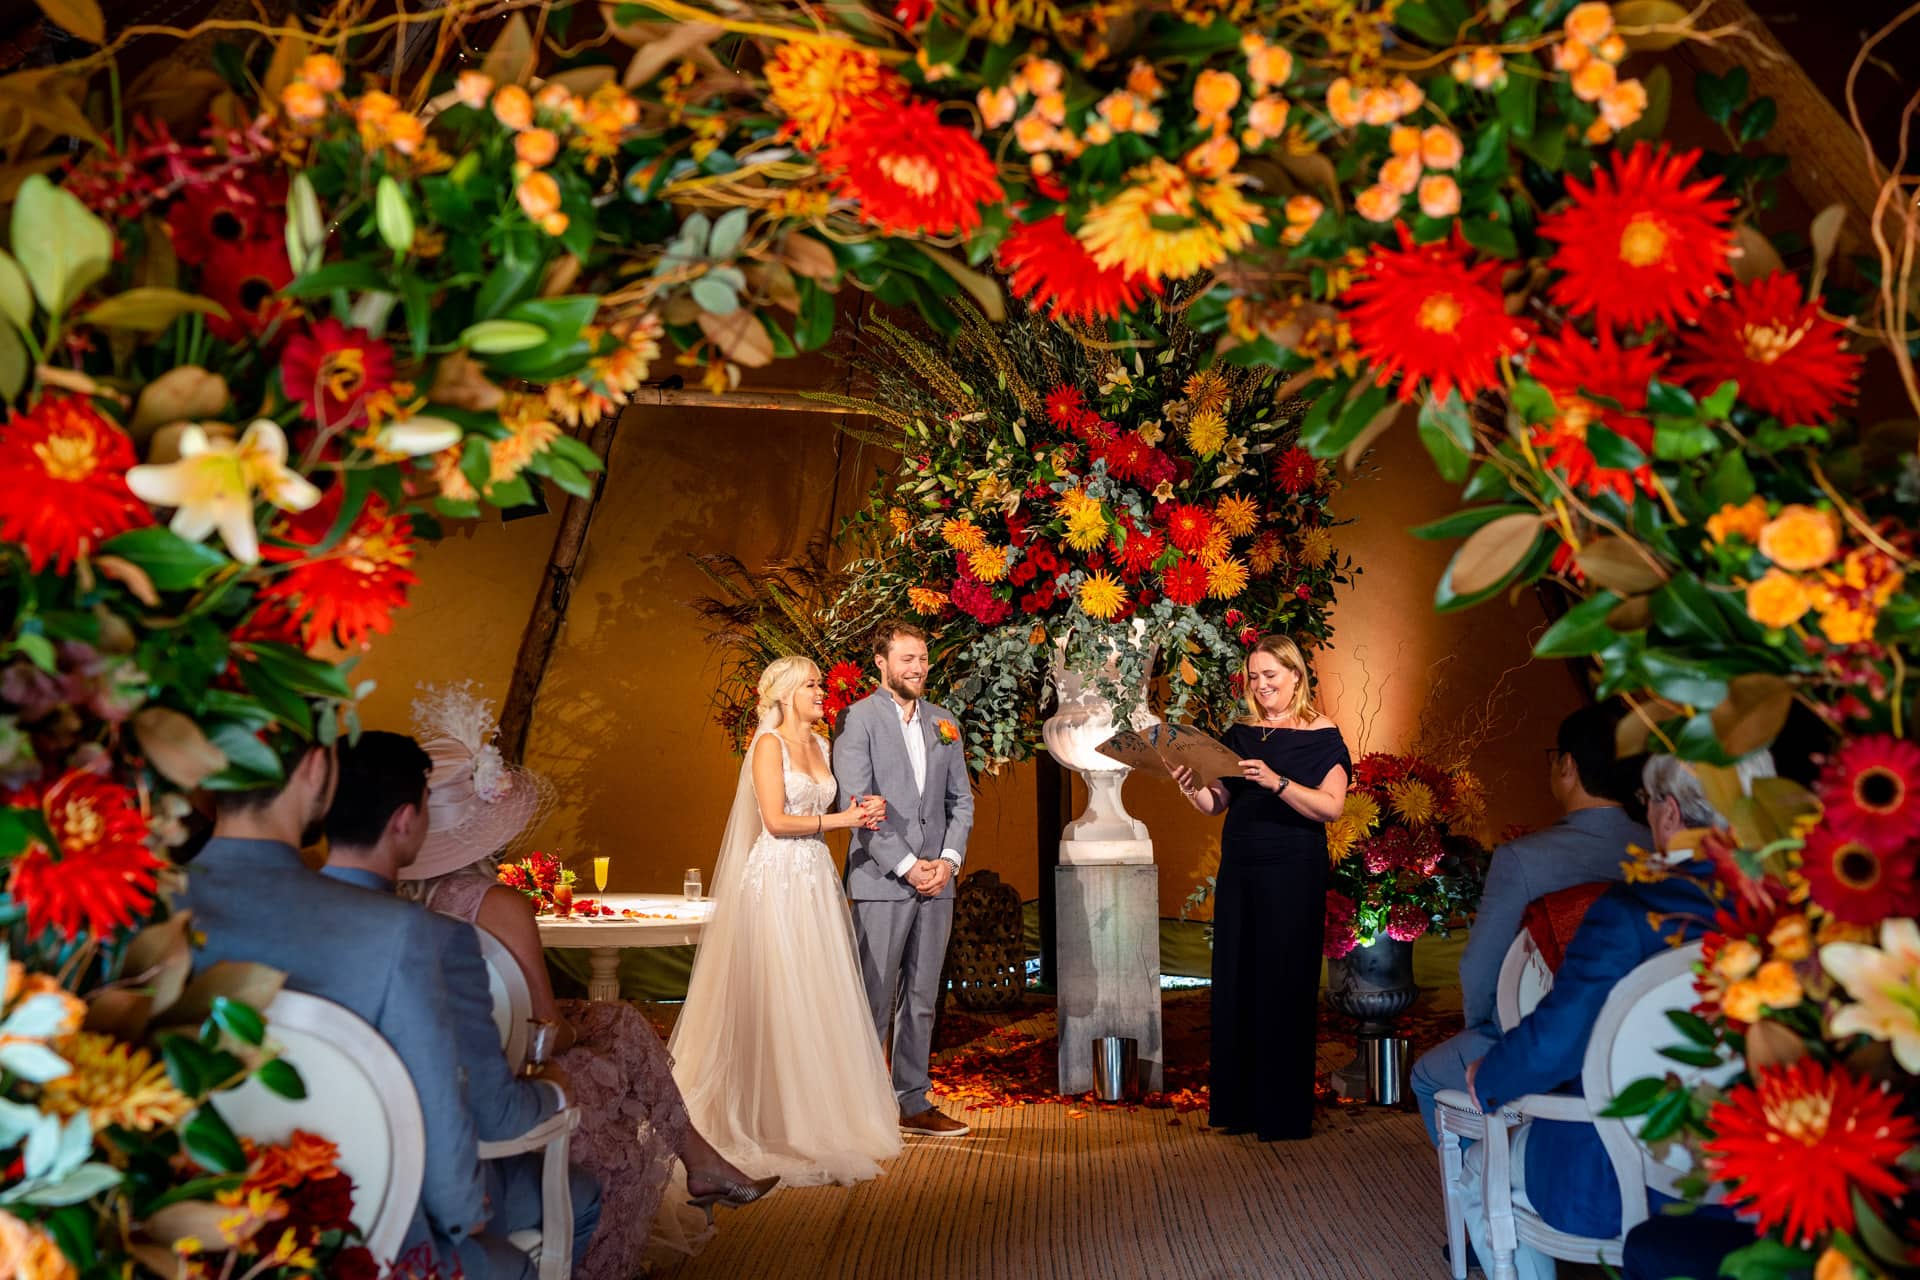 incredible ceremony room flowers